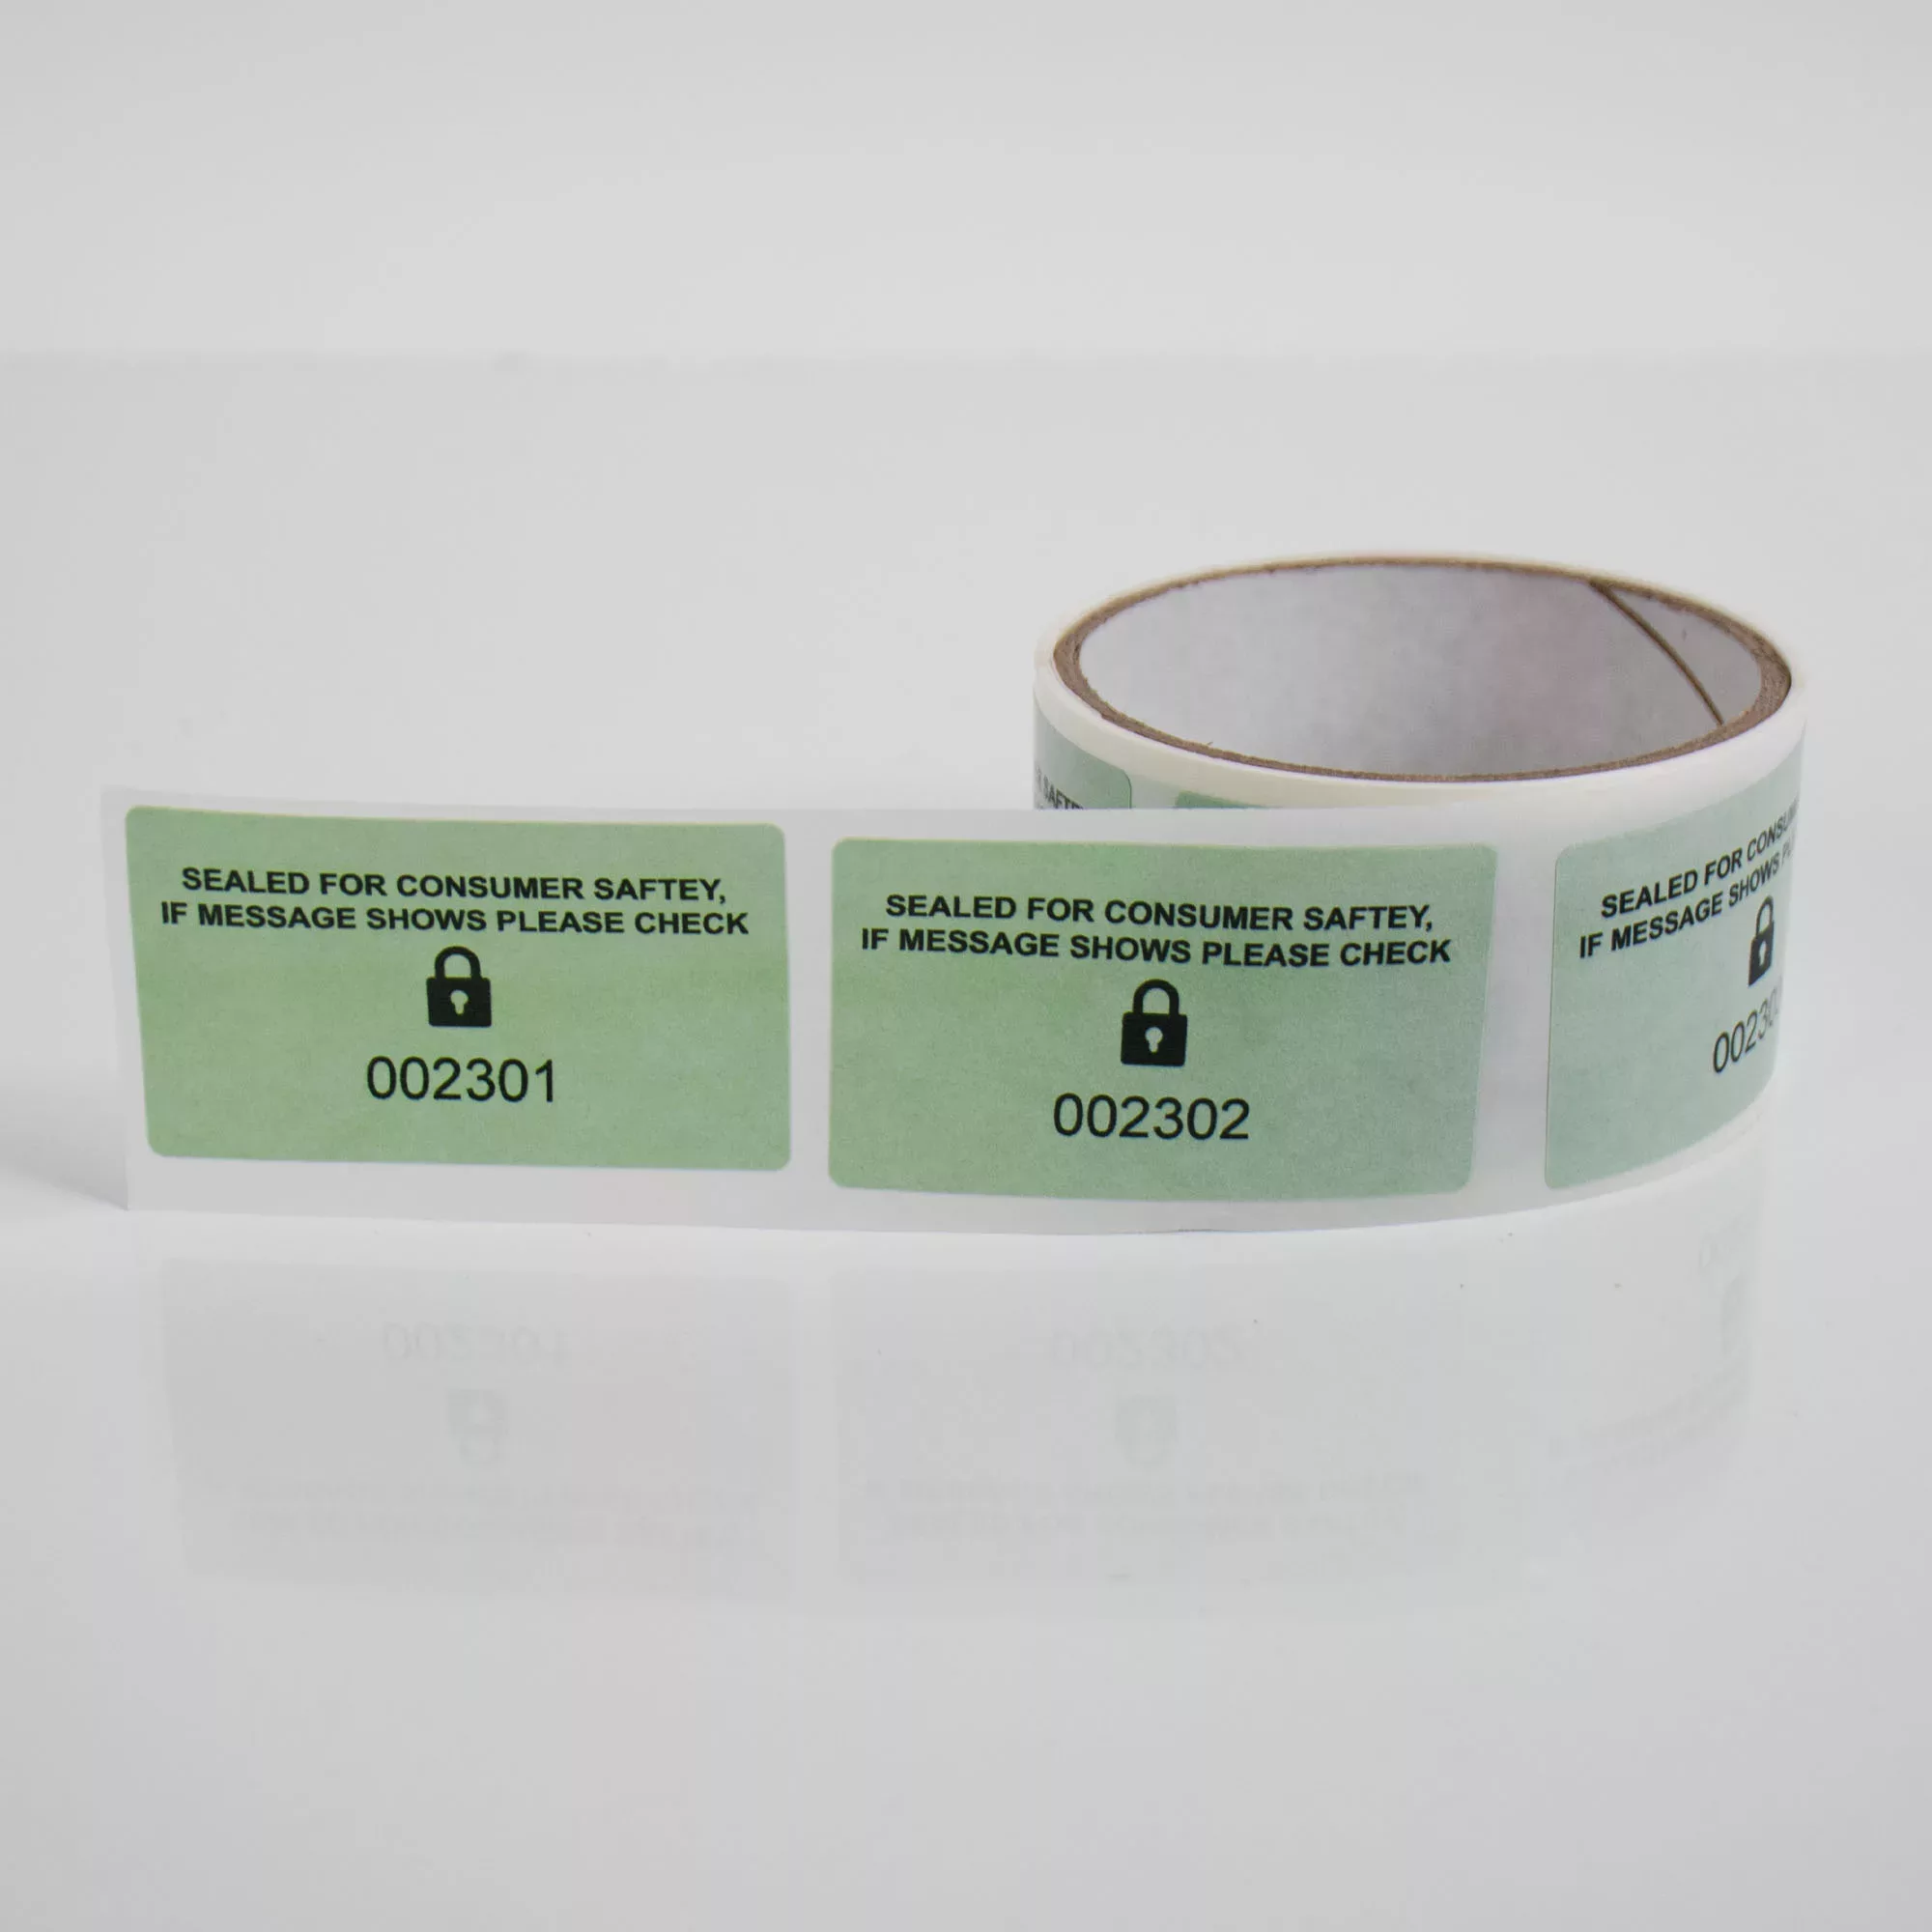 Image of a roll of Secure Item permanent green paper tamper evident labels from Tampertech, 70mm x40mm, 1000 labels per roll